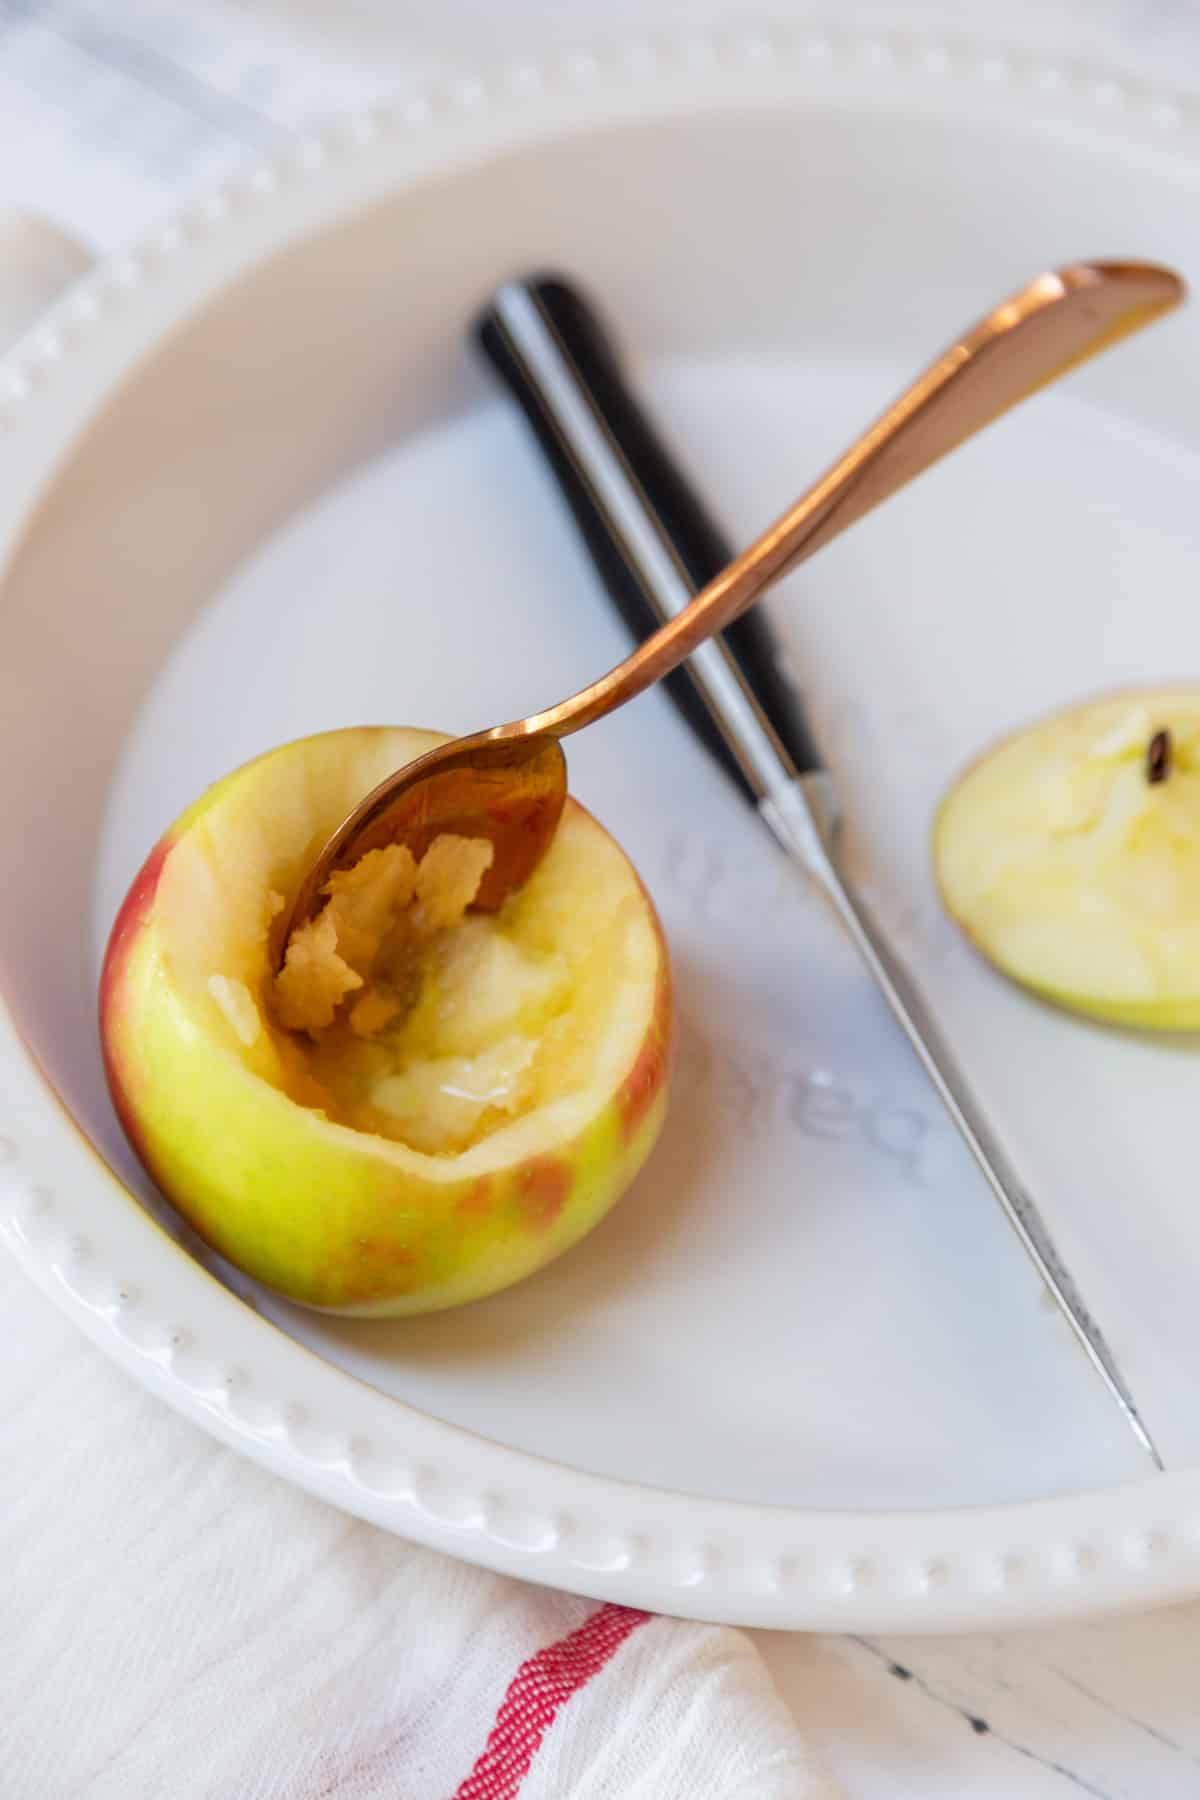 An apple with the core removed in a white baking dish with a gold spoon in the apple and a paring knife next to the apple.